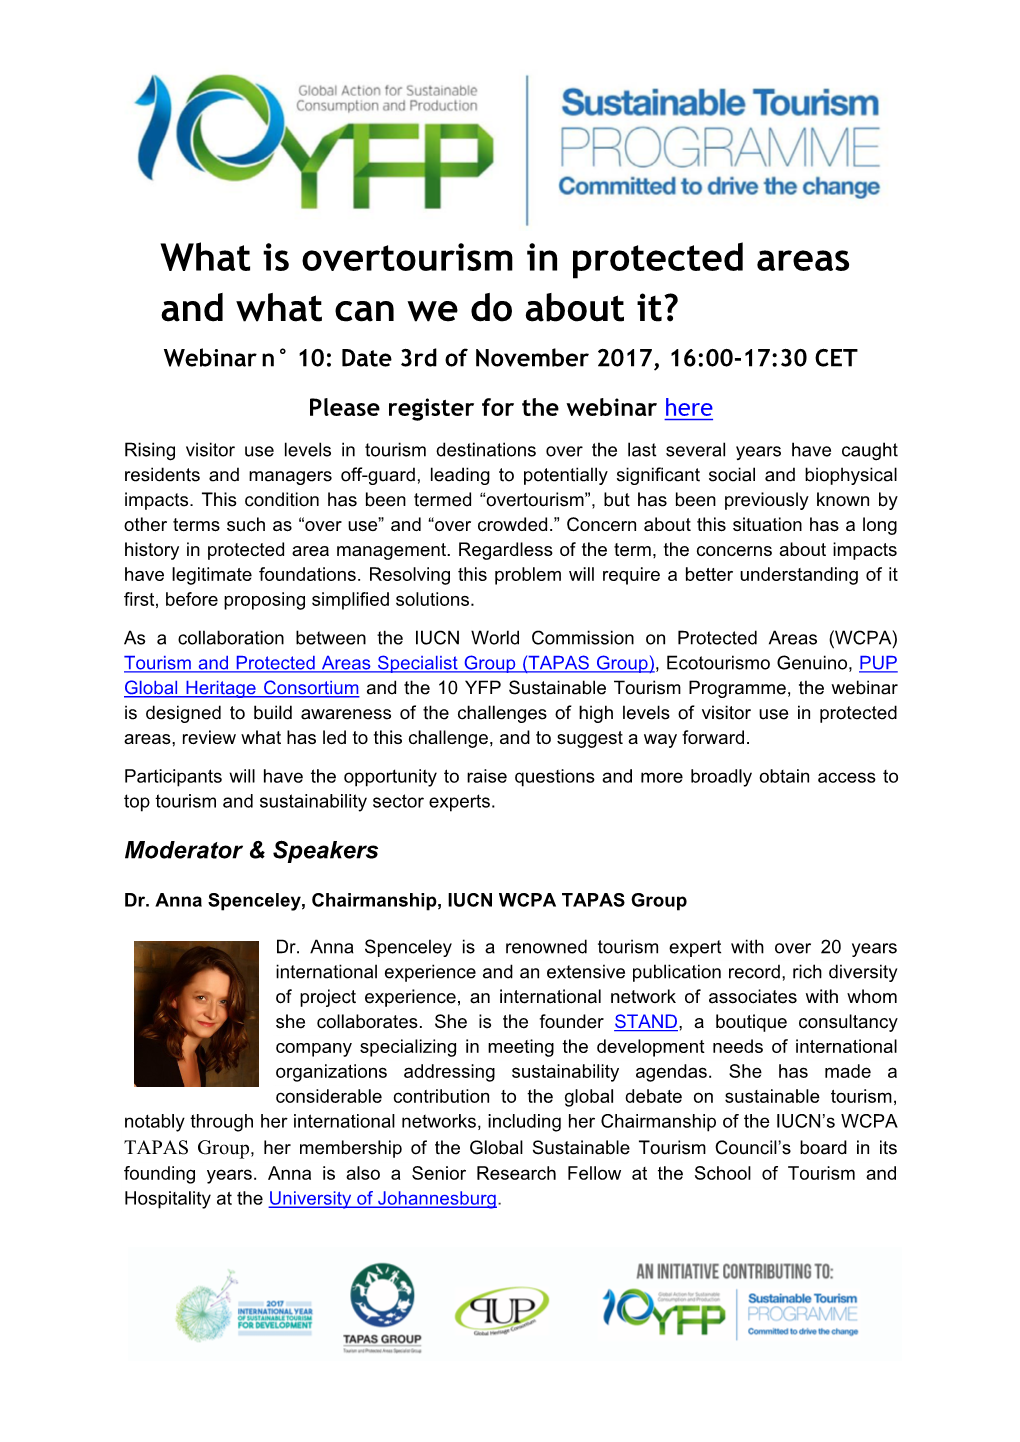 What Is Overtourism in Protected Areas and What Can We Do About